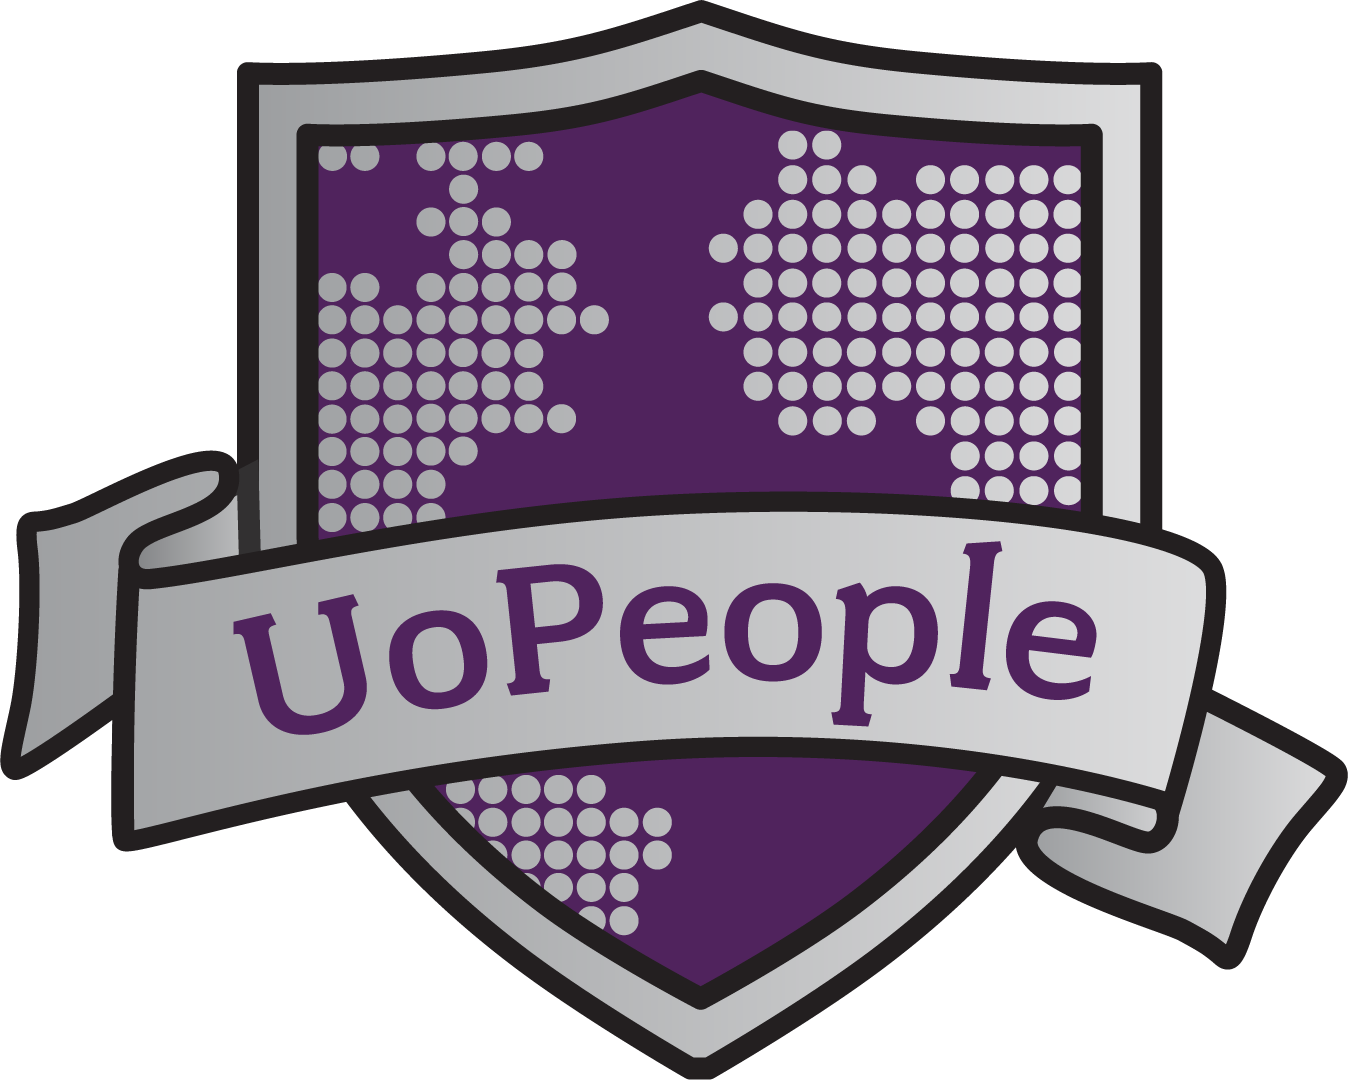 UNIVERSITY OF THE PEOPLE